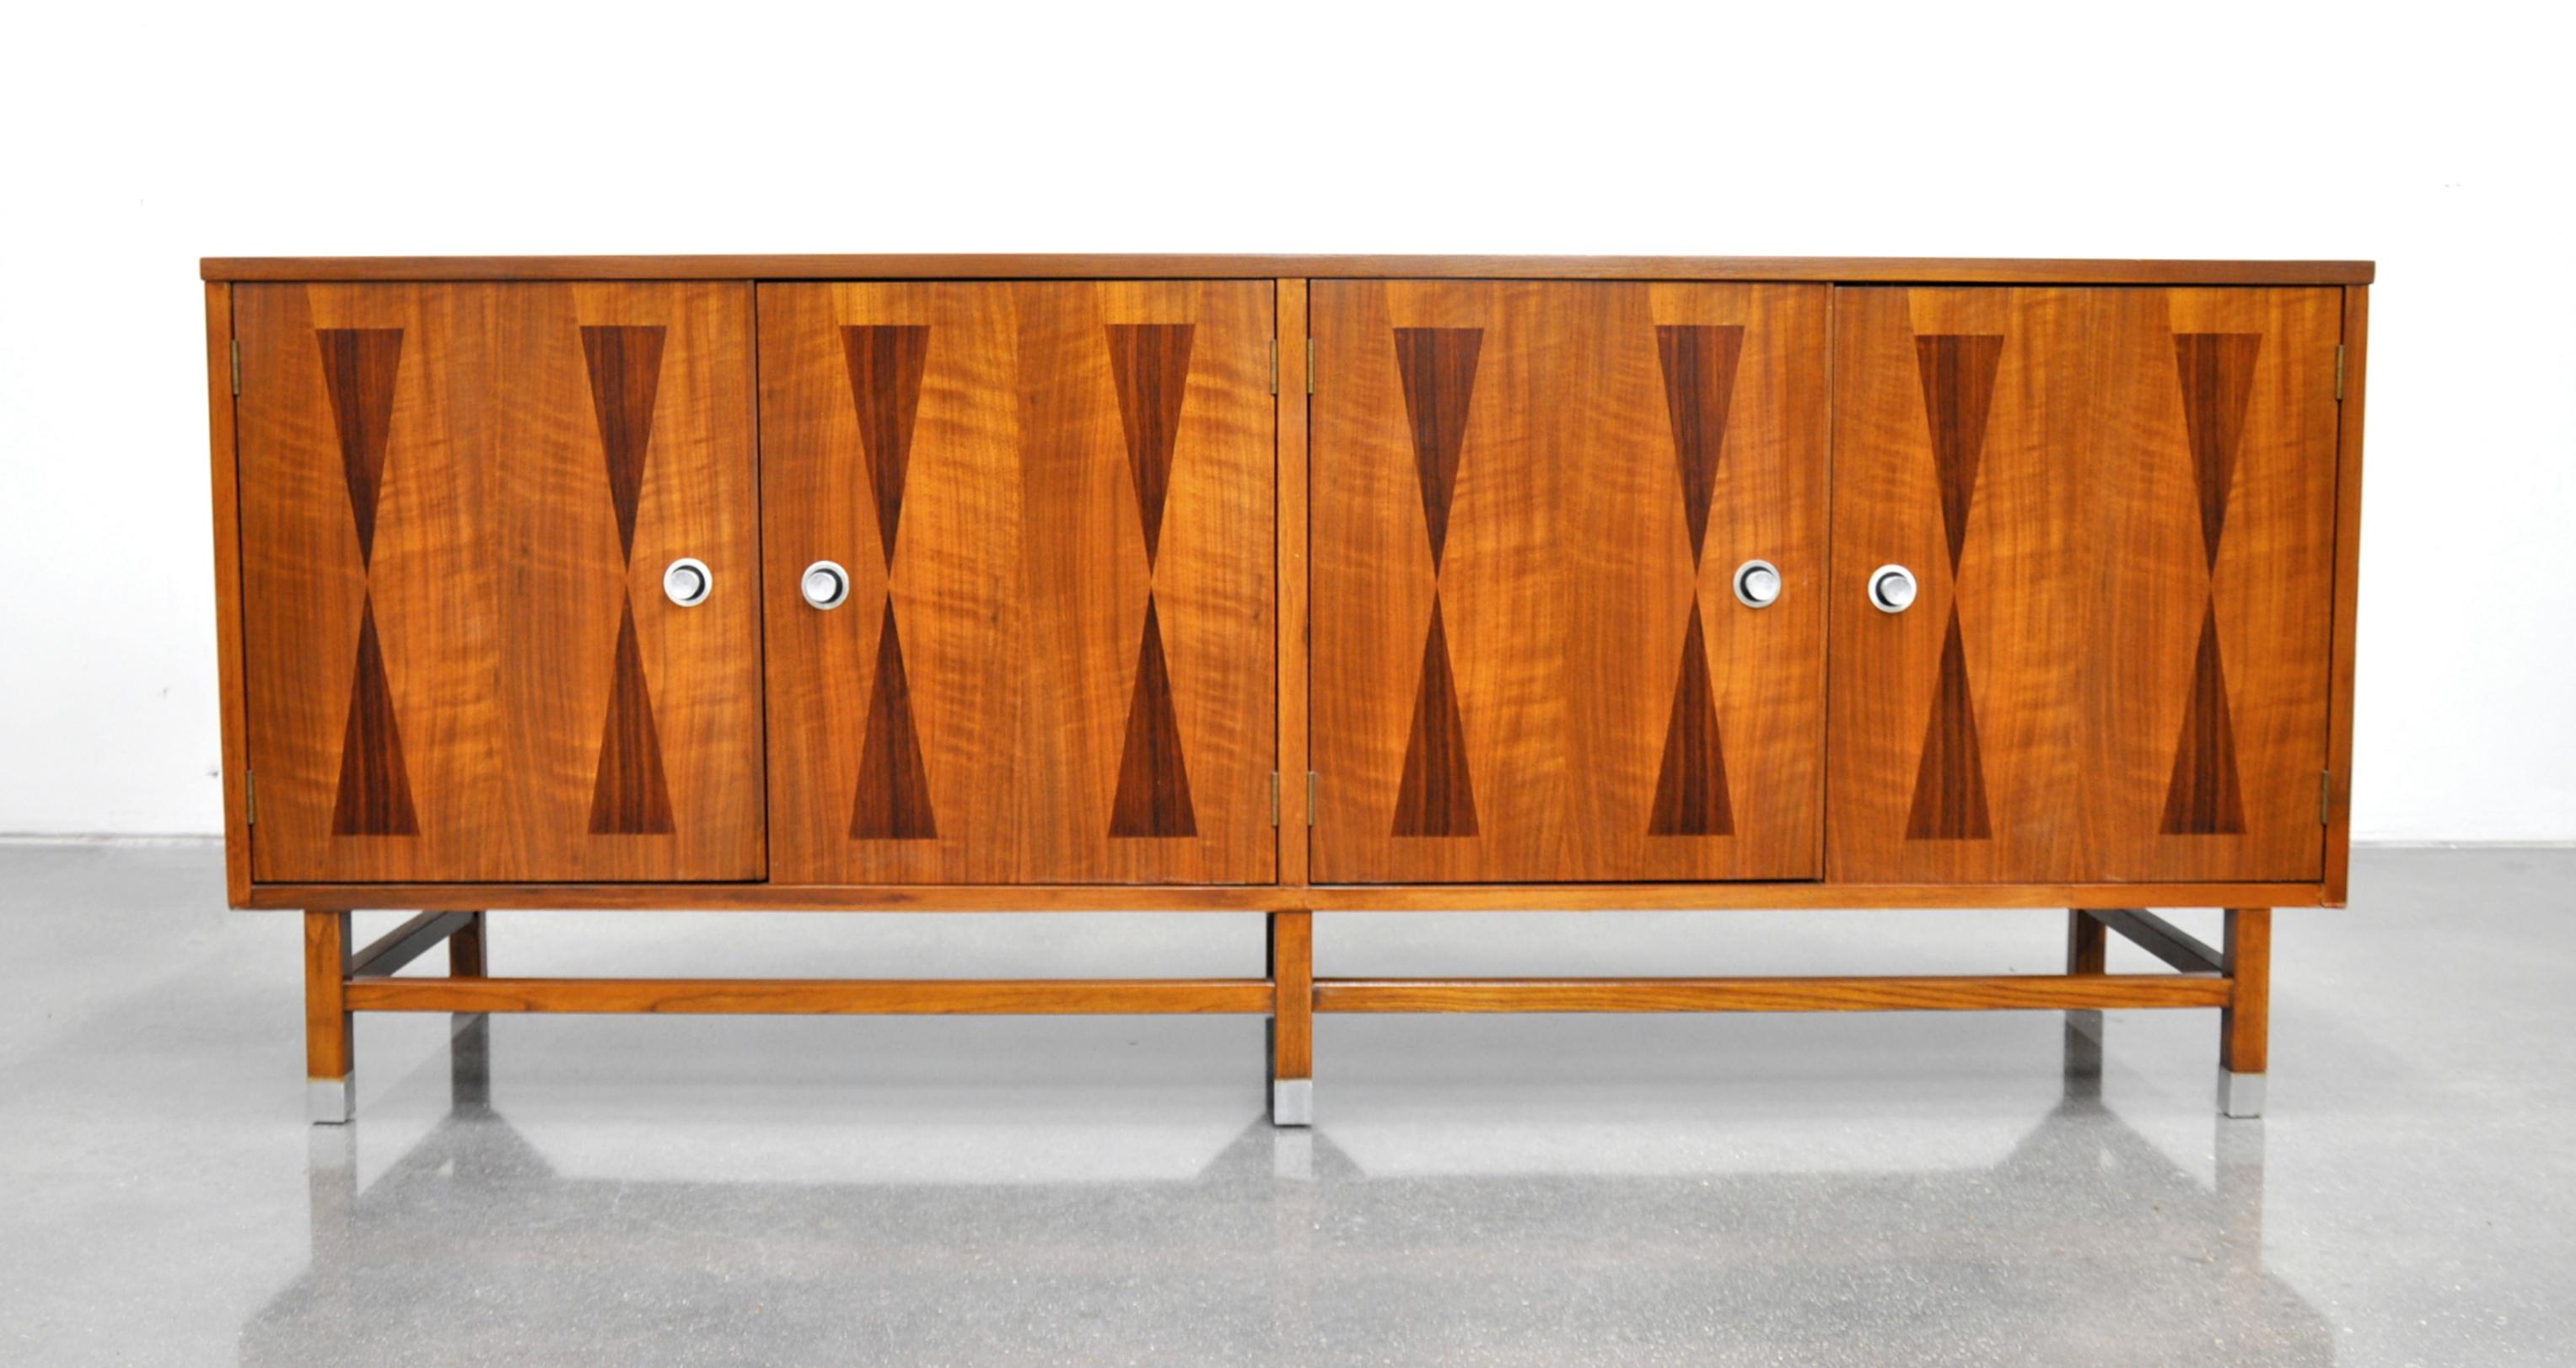 Striking Mid-Century Modern wall unit bar cabinet from Stanley's Linear Precision Group dating from the mid-1960s. The sideboard features a top with rosewood banding and four doors with hourglass rosewood marquetry inlaid fronts, opening to an